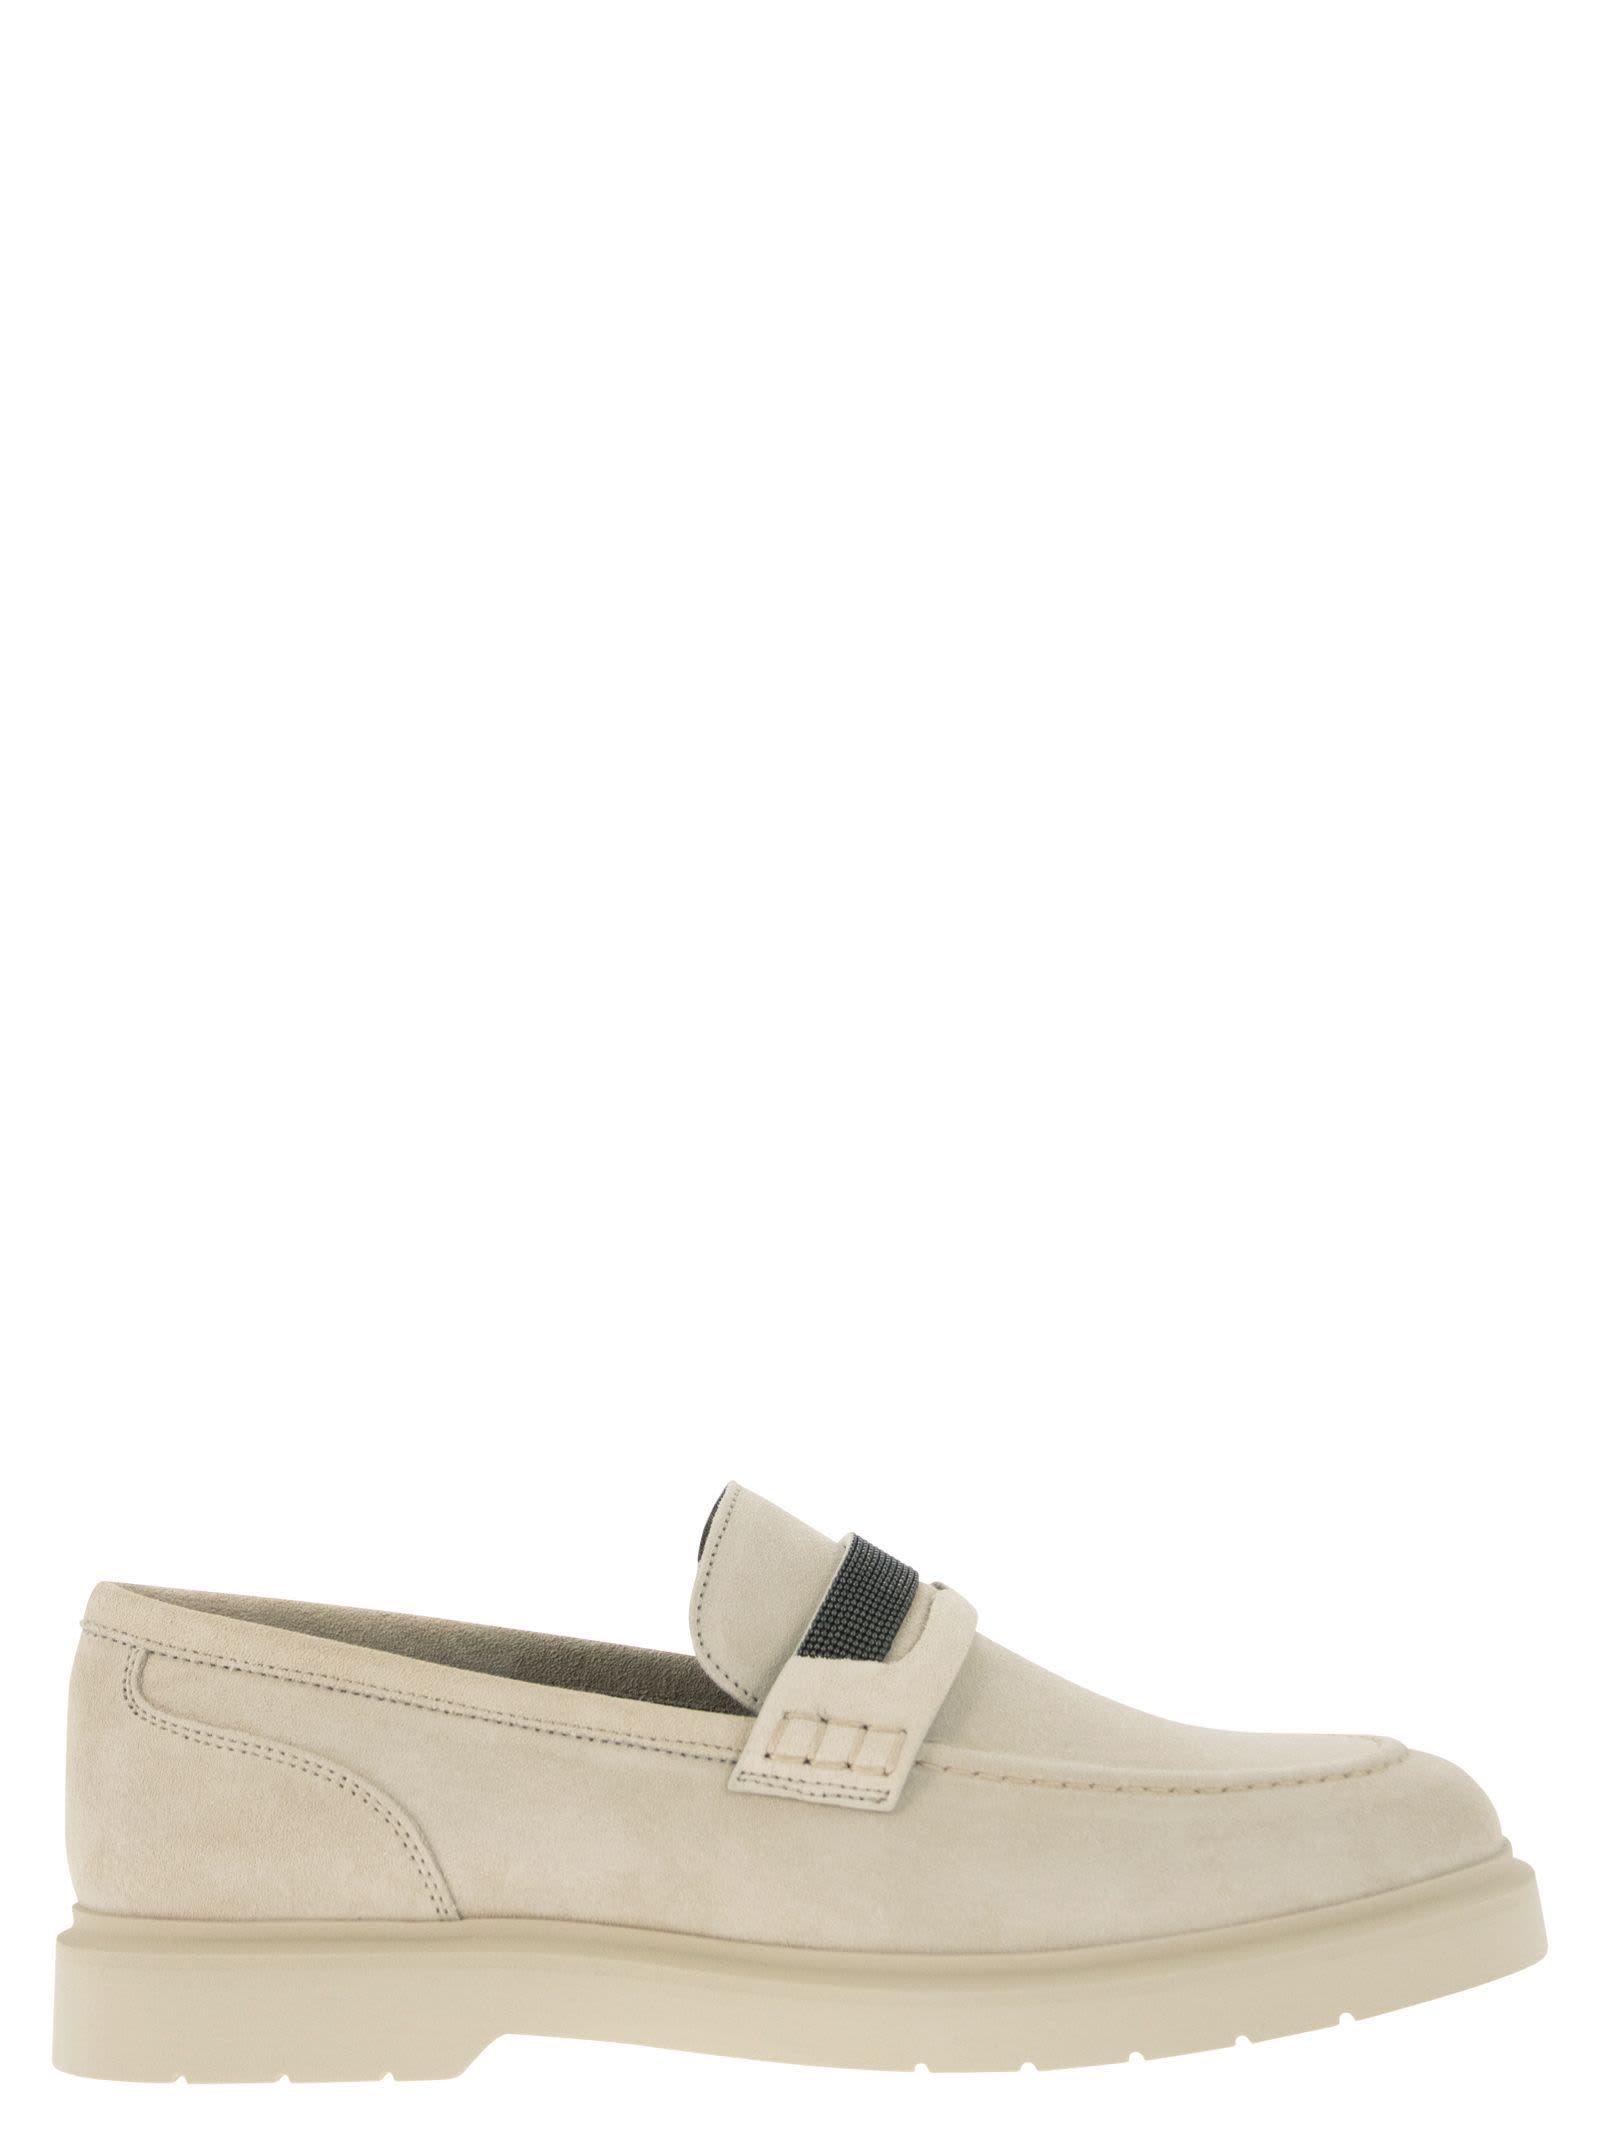 Brunello Cucinelli Suede Penny Loafer With Jewellery - Ivory - female - Size: 38